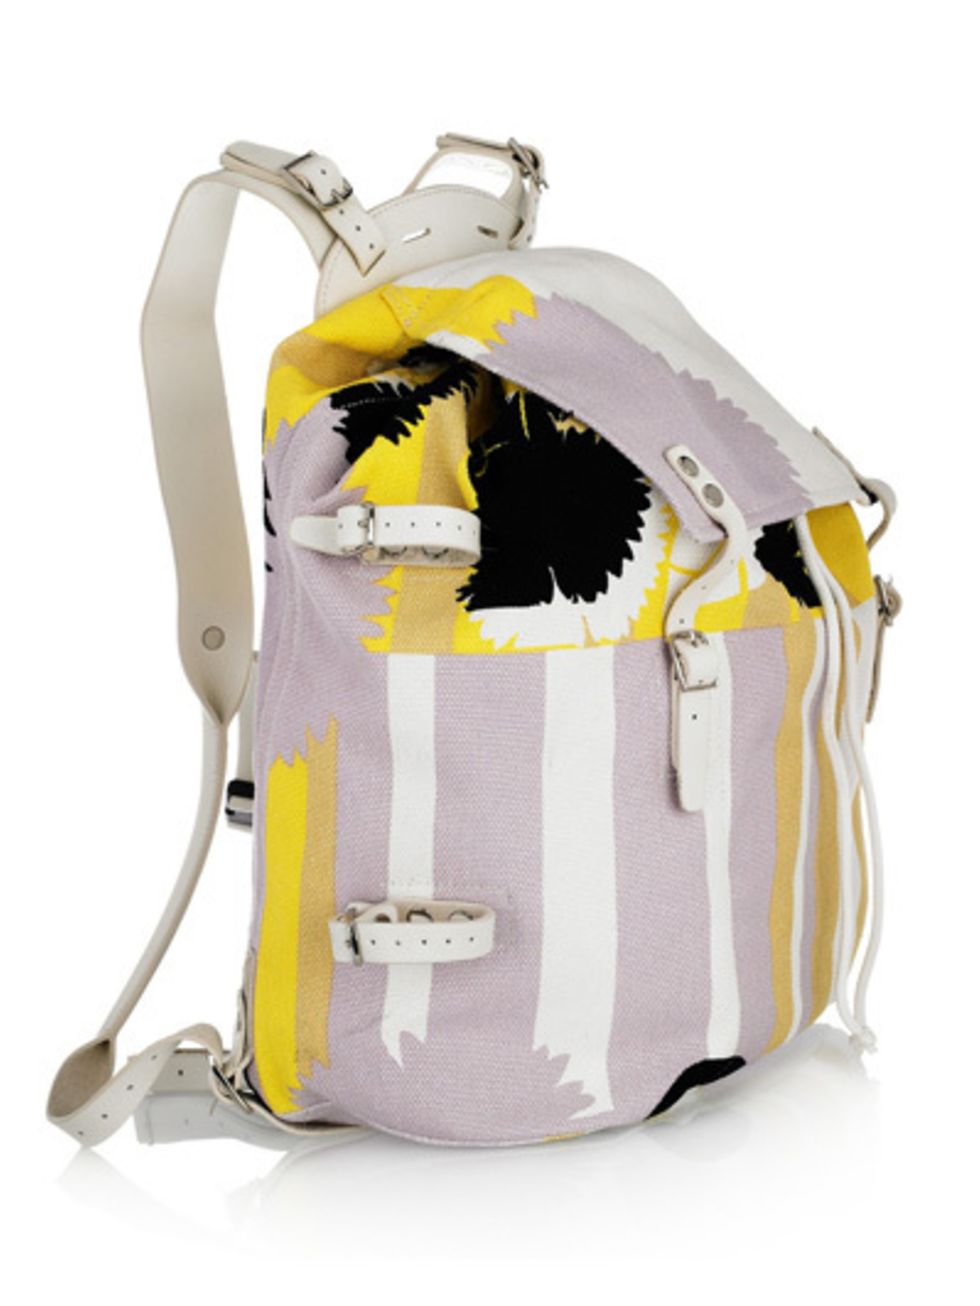 Product, Yellow, White, Style, Bag, Grey, Beige, Shoulder bag, Silver, Strap, 